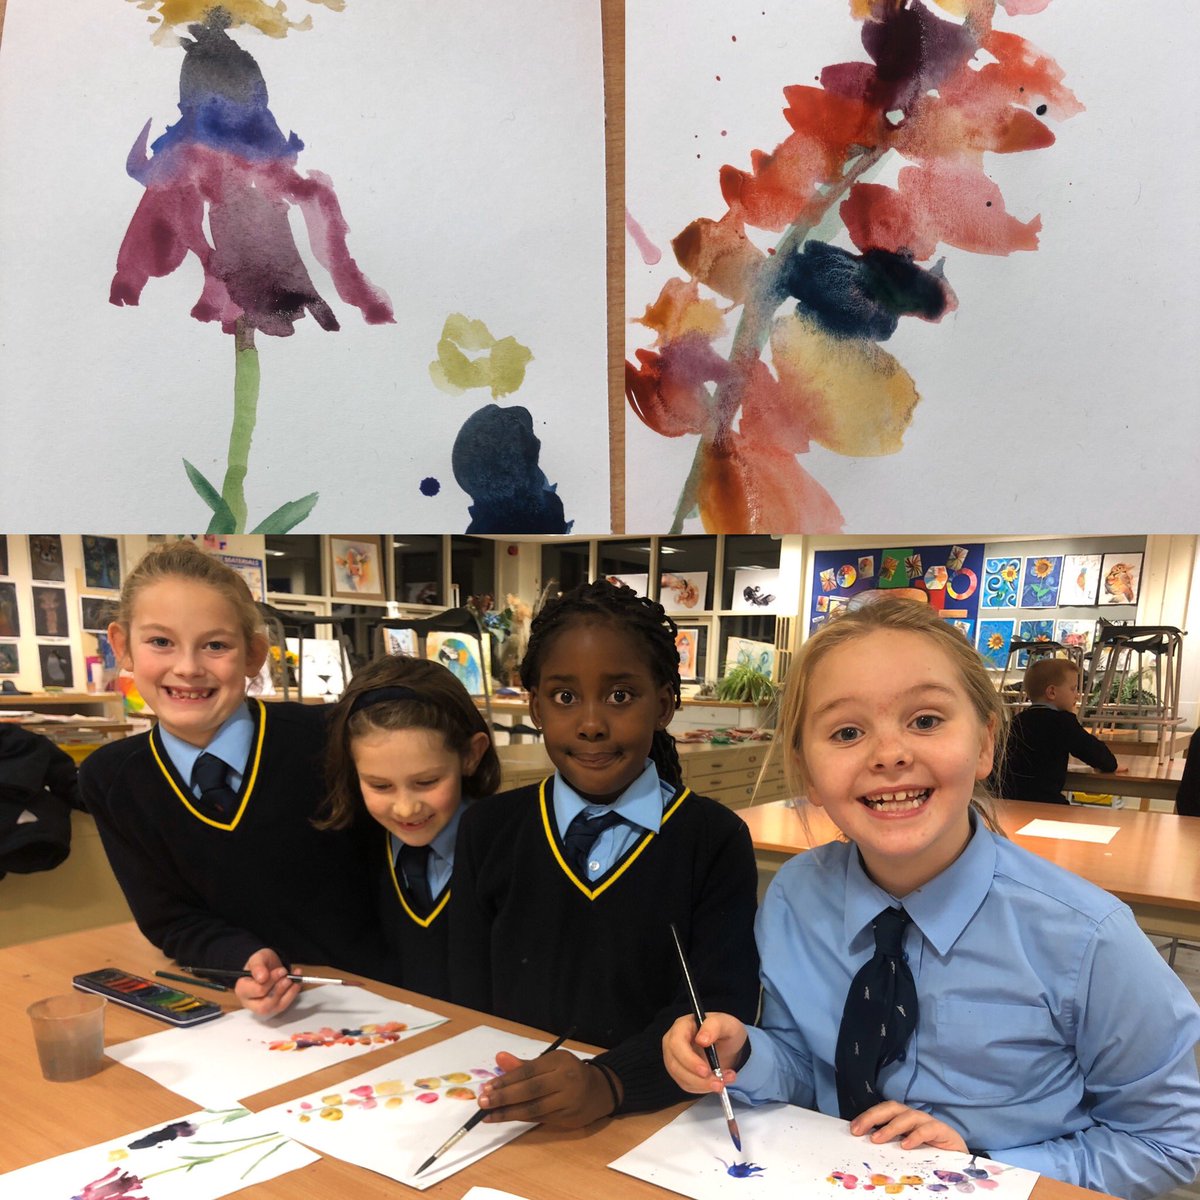 Our junior boarders had a watercolour lesson this evening with Mrs Casey. #creative @ForemarkeArt  #inspiredbycolour #everychildisanartist #relaxation